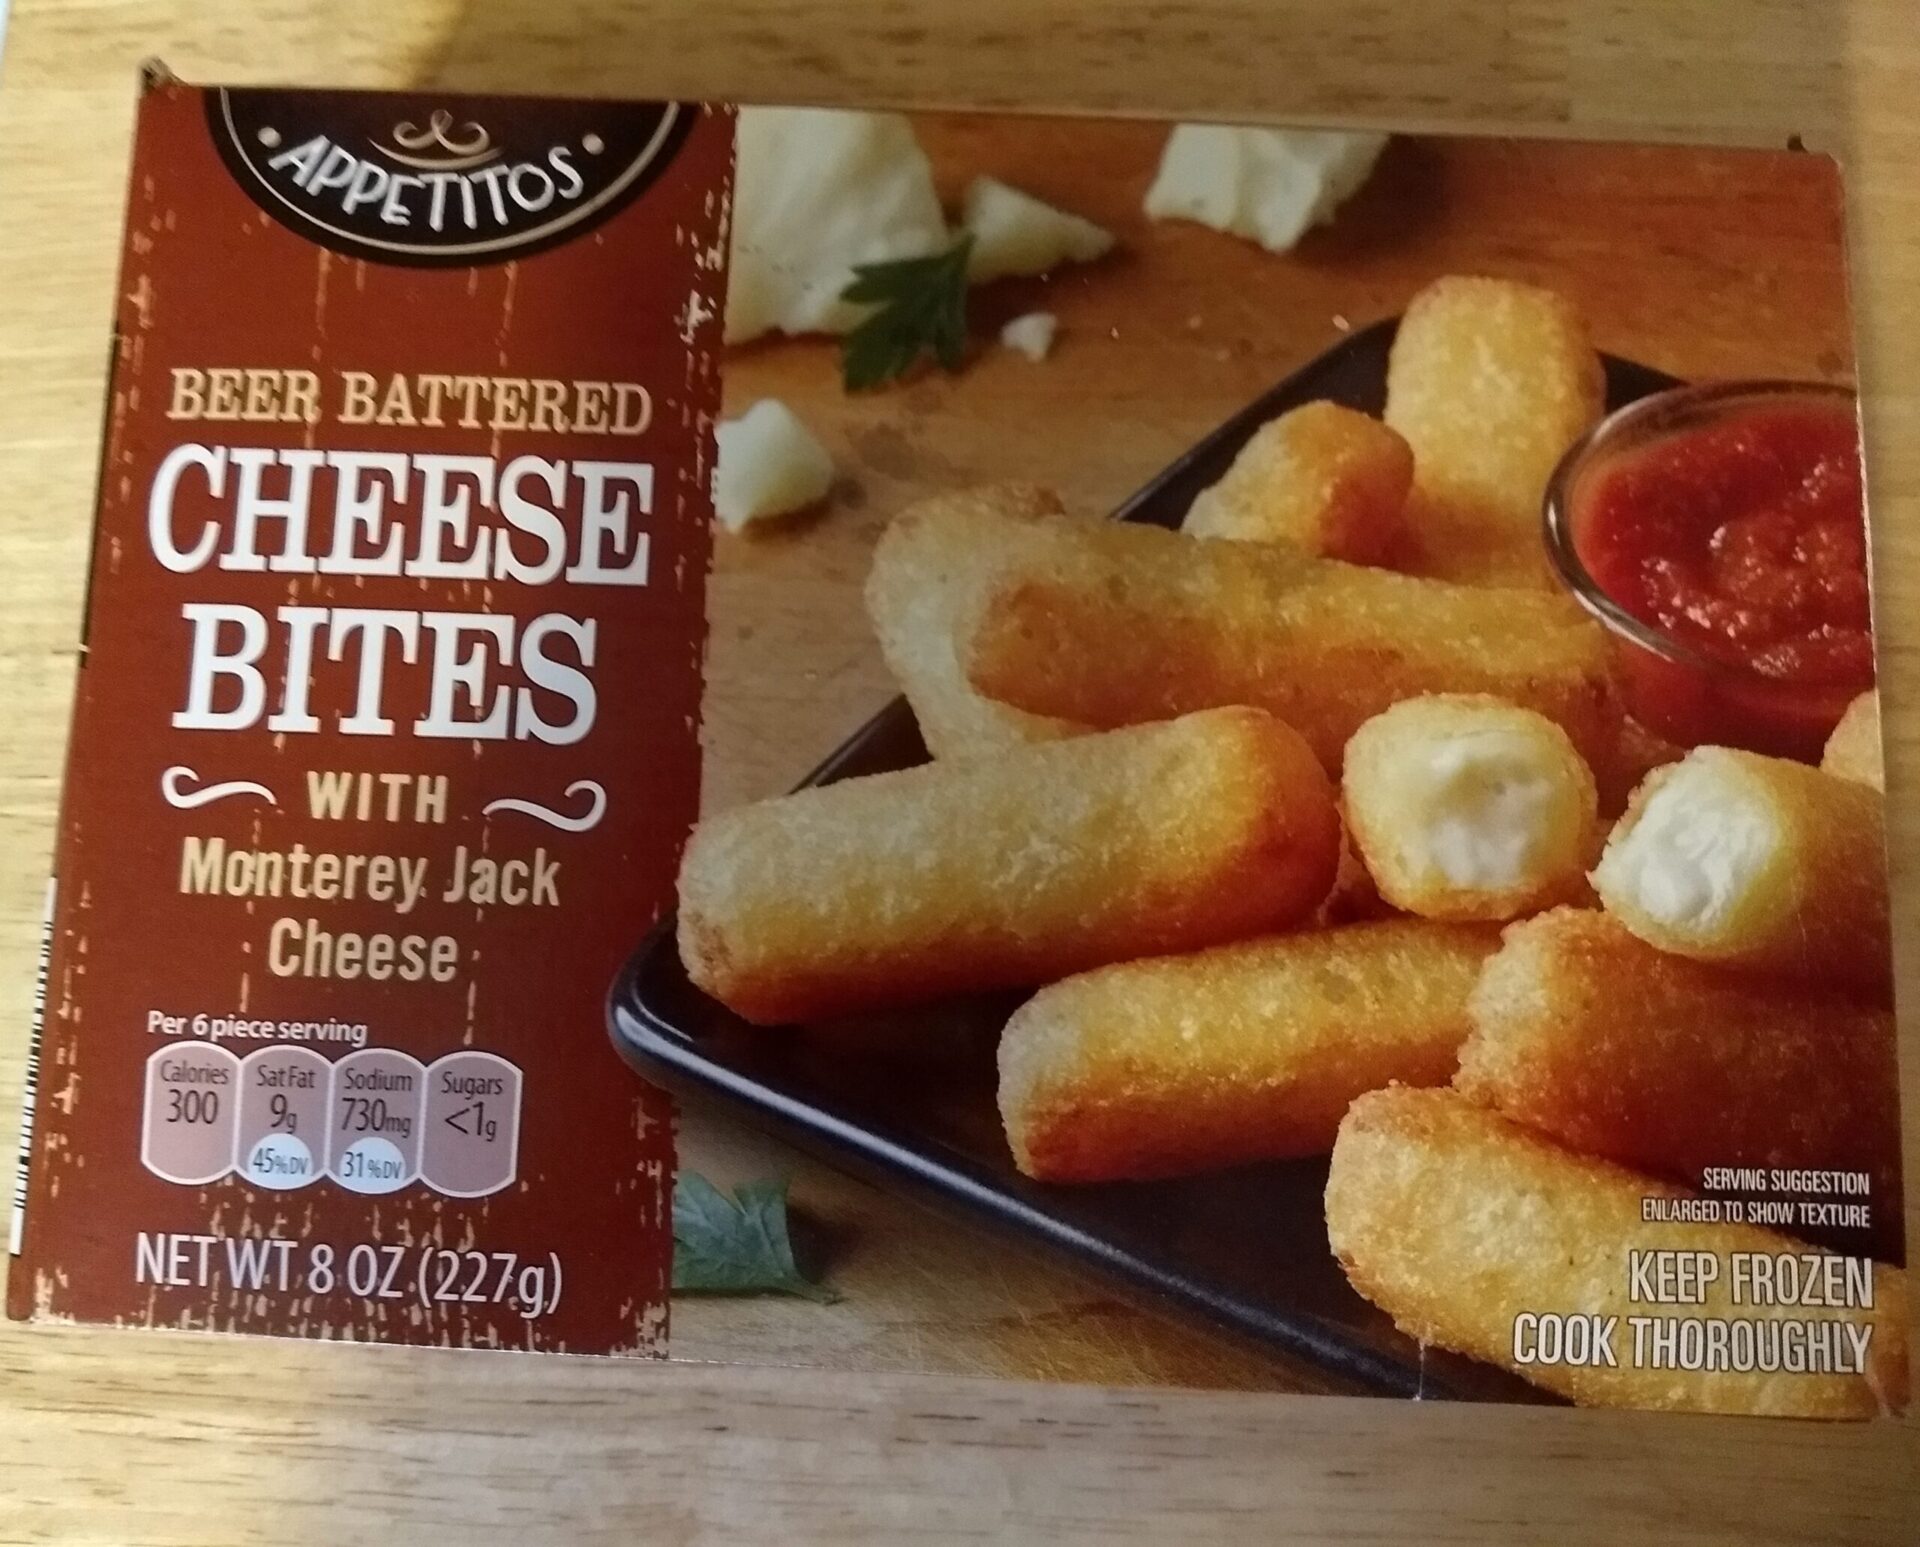 Appetitos Beer Battered Cheese Bites